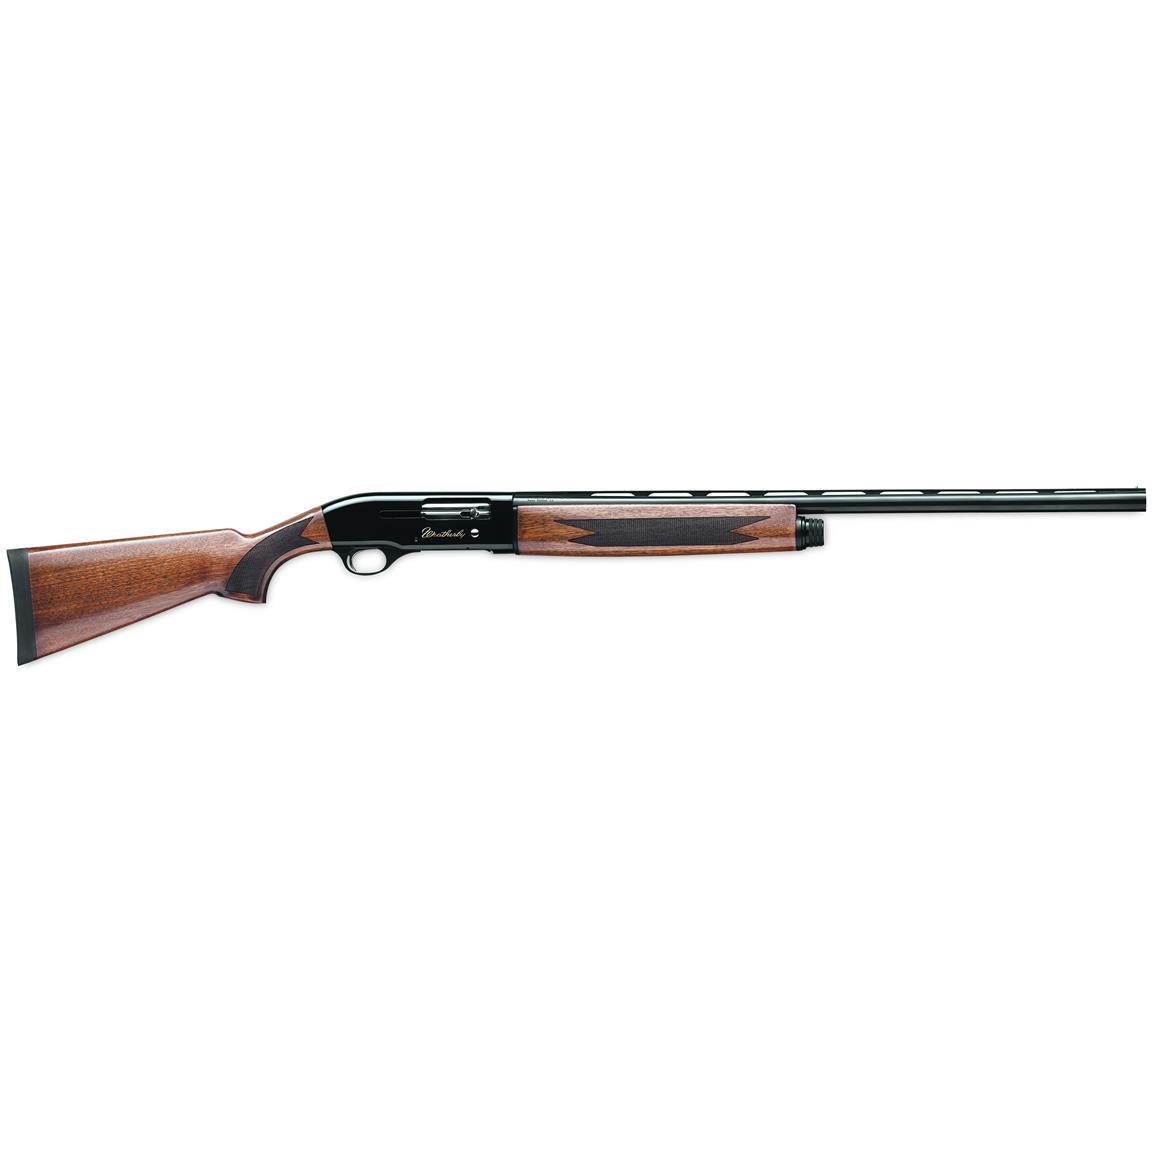 Weatherby SA-08 Deluxe, Semi-Automatic, 20 Gauge, 28" Barrel, 4+1 Rounds